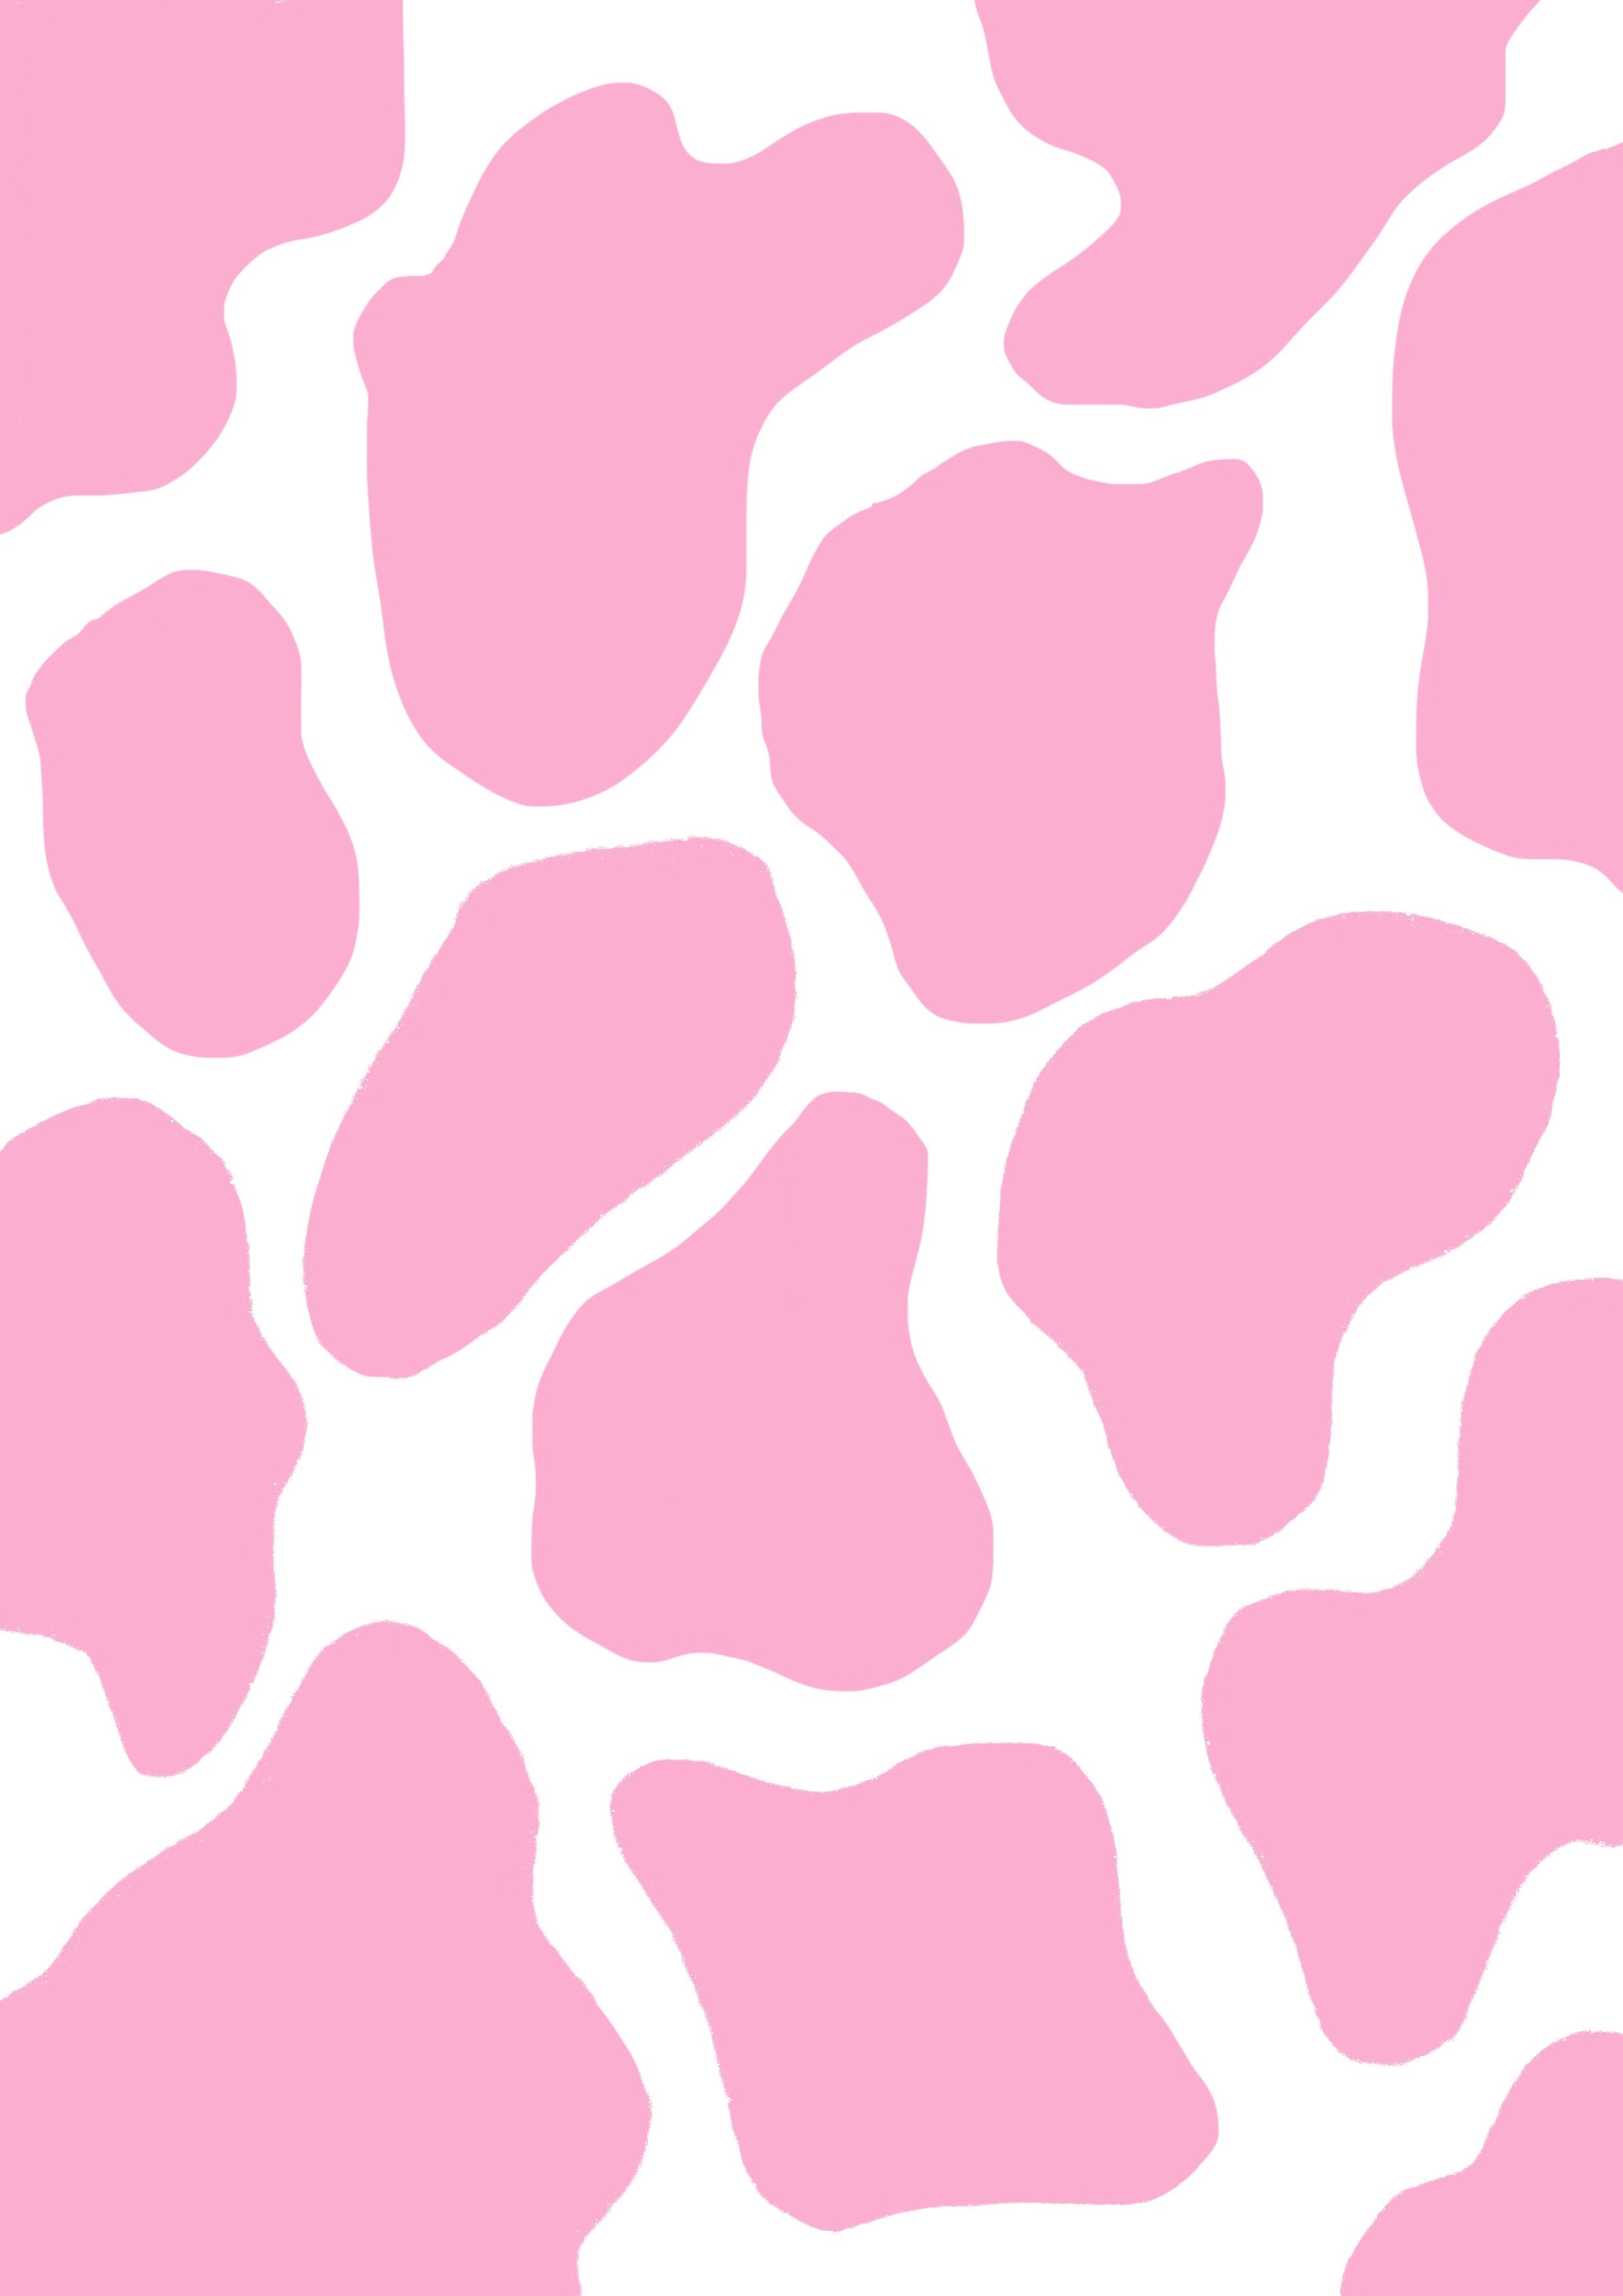 Pink Cow Print Wallpapers Wallpaper Cave It, like many of the colors, can tie into multiple aesthetics. pink cow print wallpapers wallpaper cave